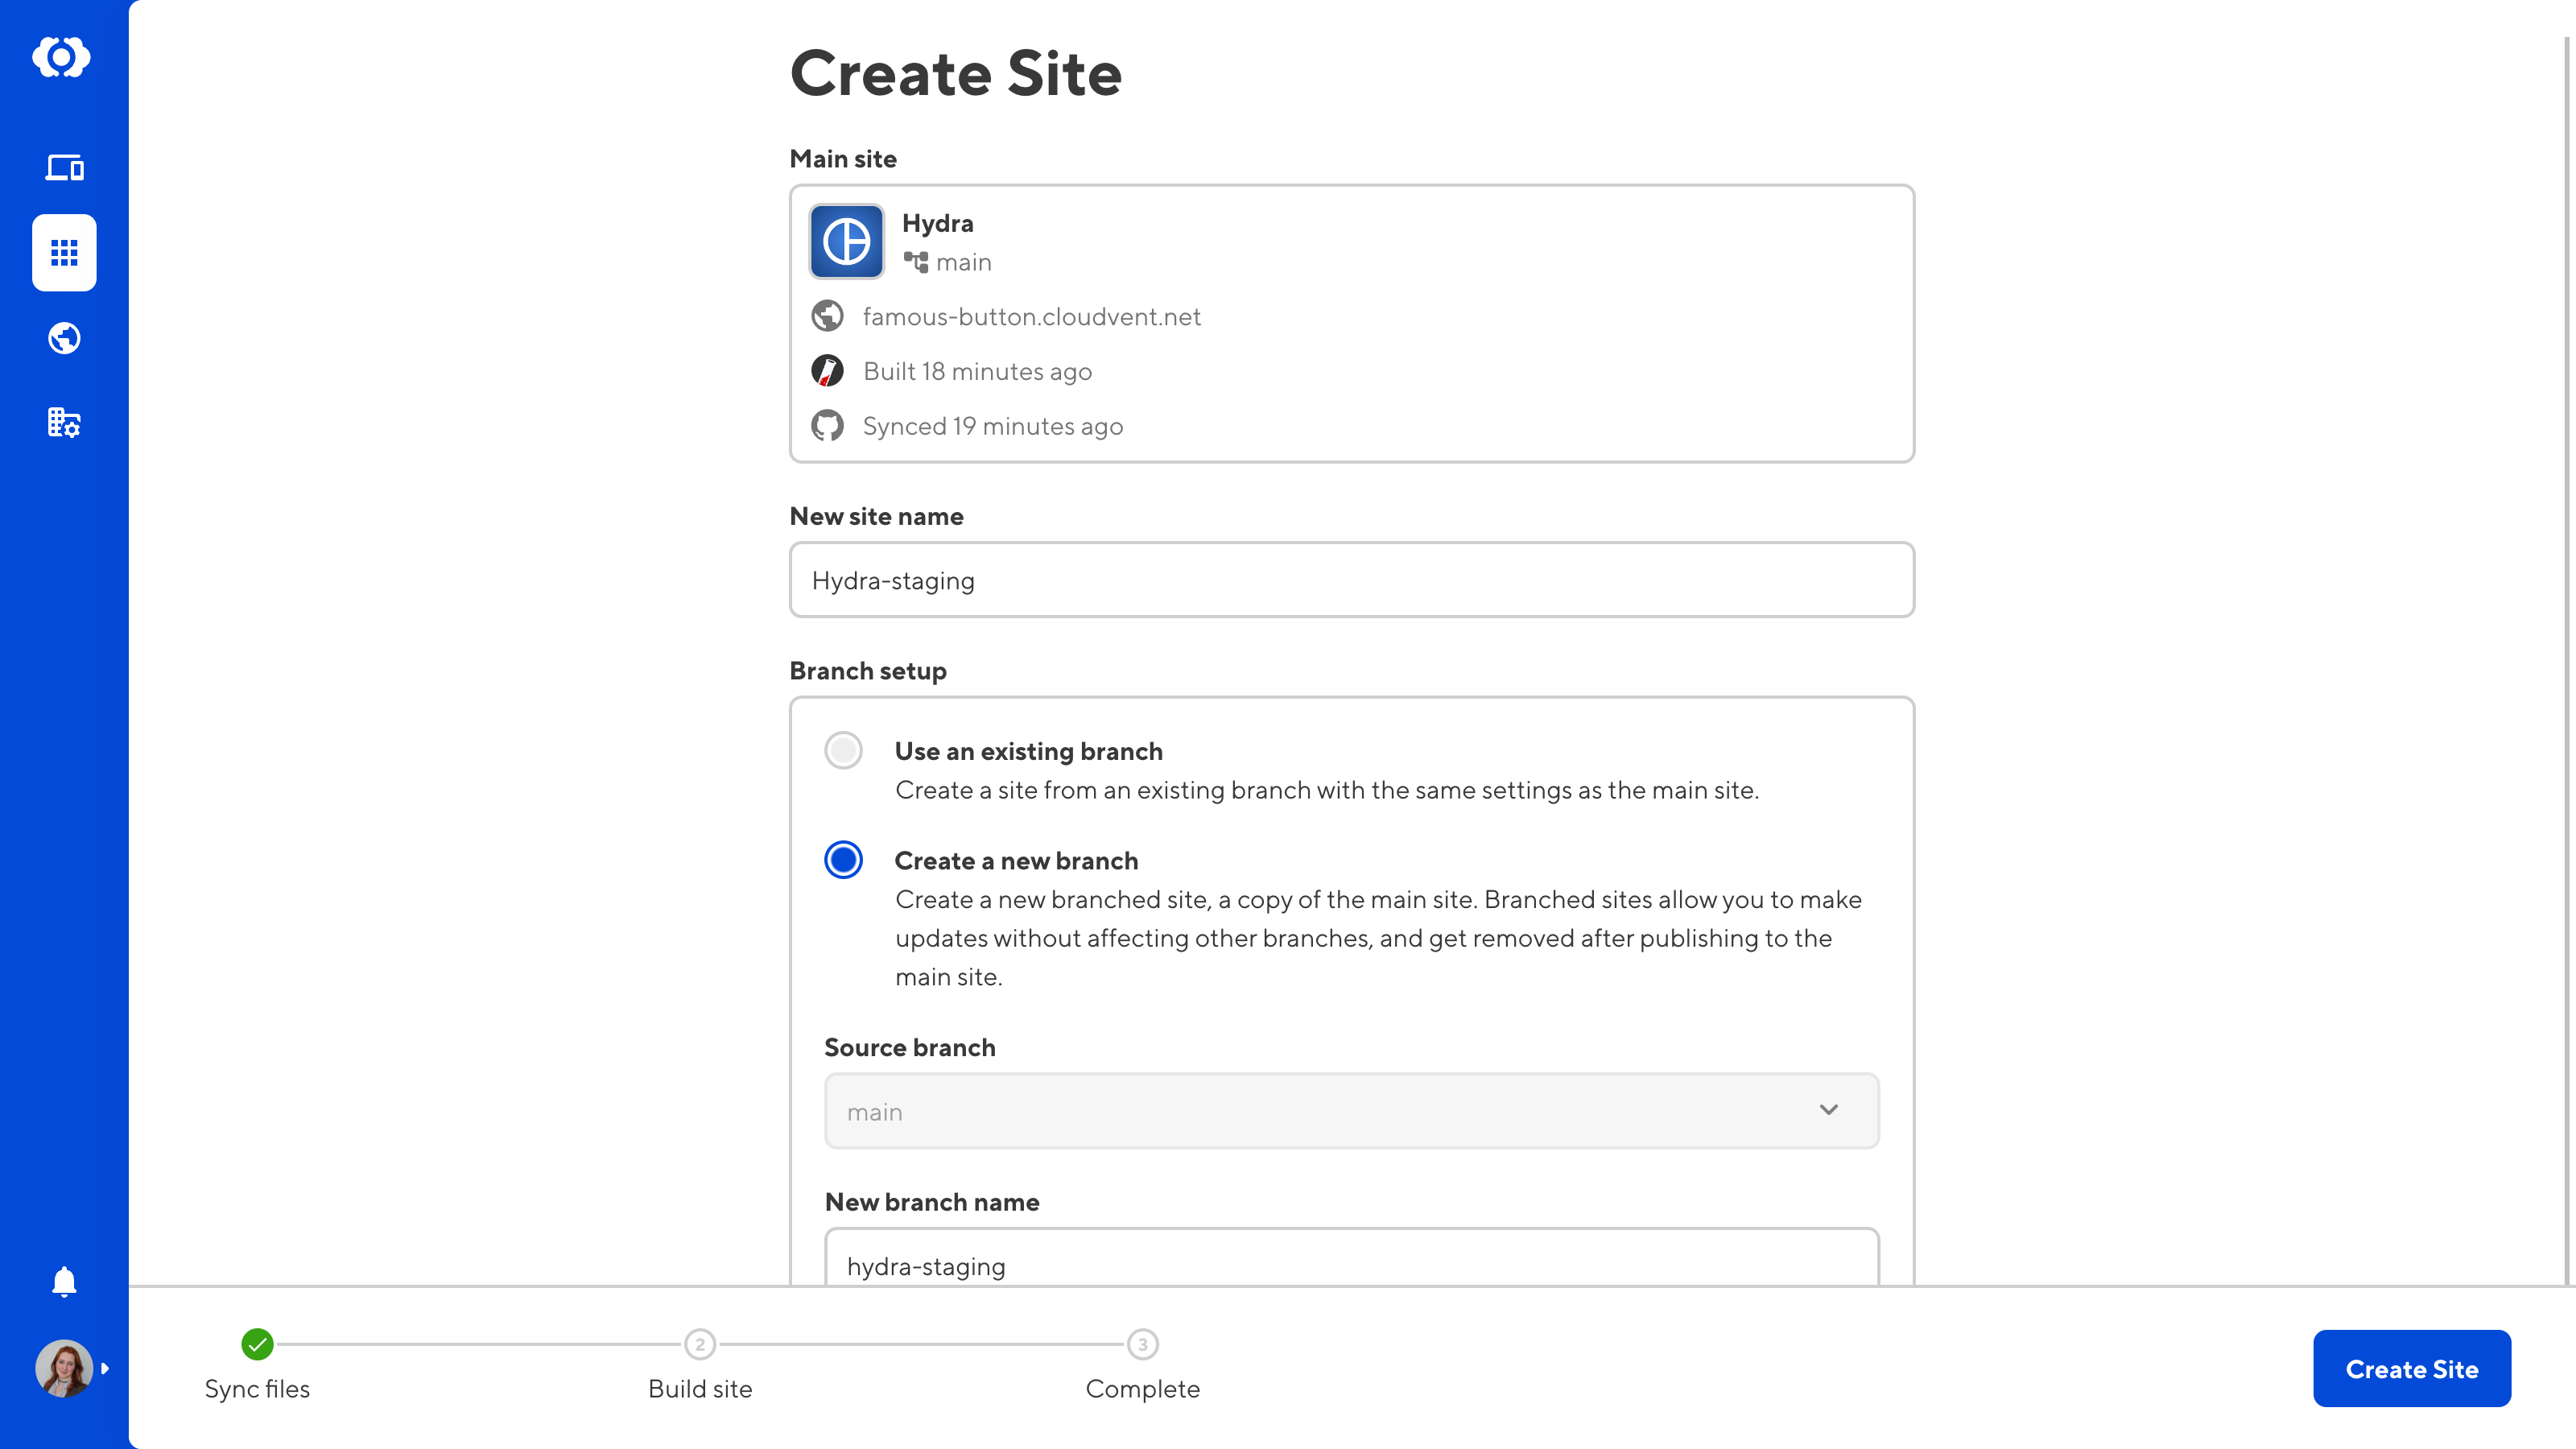 A screenshot of the CloudCannon app shows the Create Site page with fields for the main site, new site name, and branch setup.